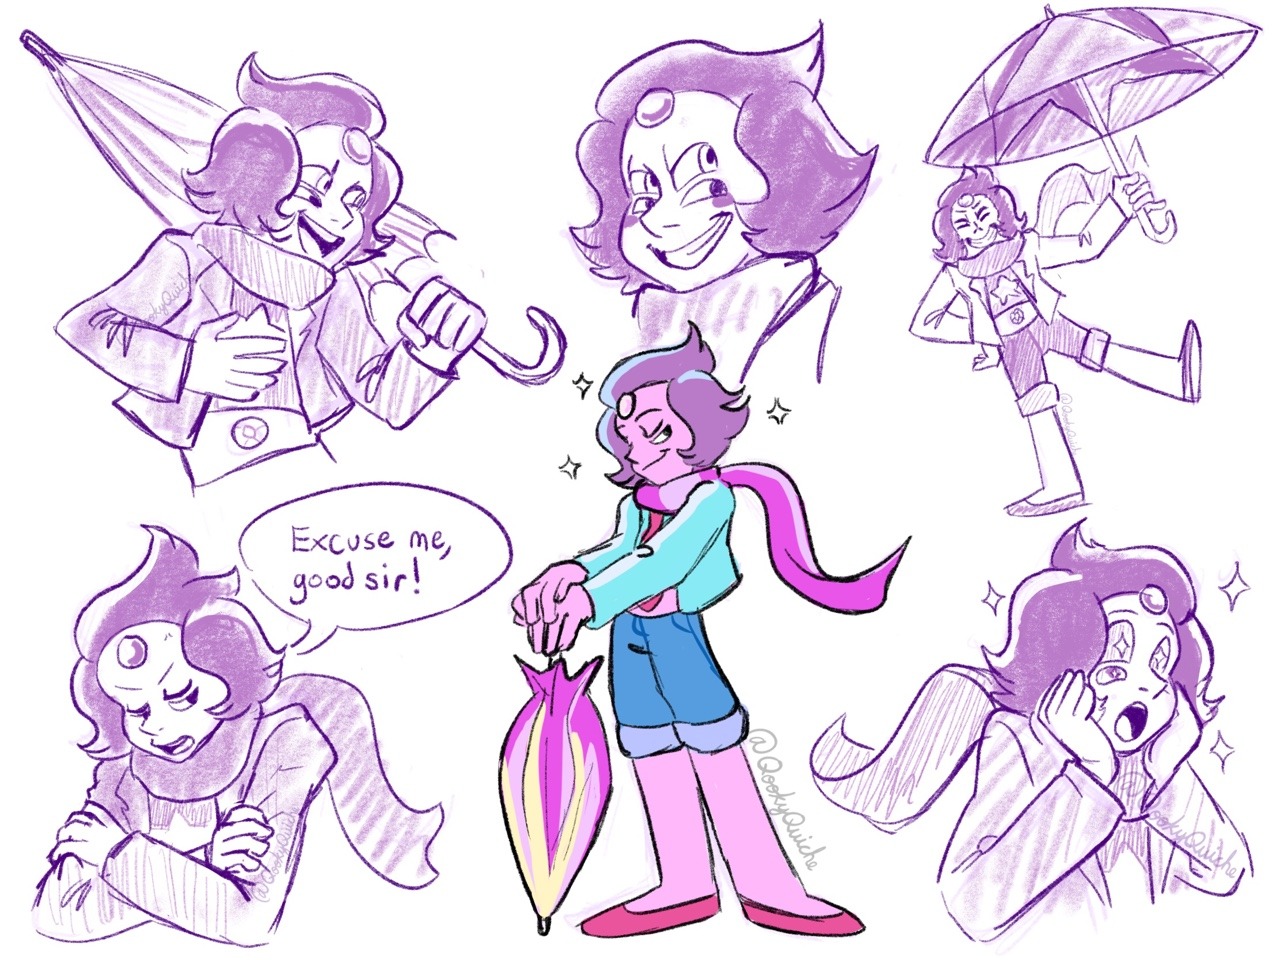 Did I tell ya’ll how muh I love Rainbow Quartz 2.0?
I stan the pastel fusion. Mister Fancy Pants.
Apparently his older design had a scarf and I was disapponted they didn’t keep it so I added it...